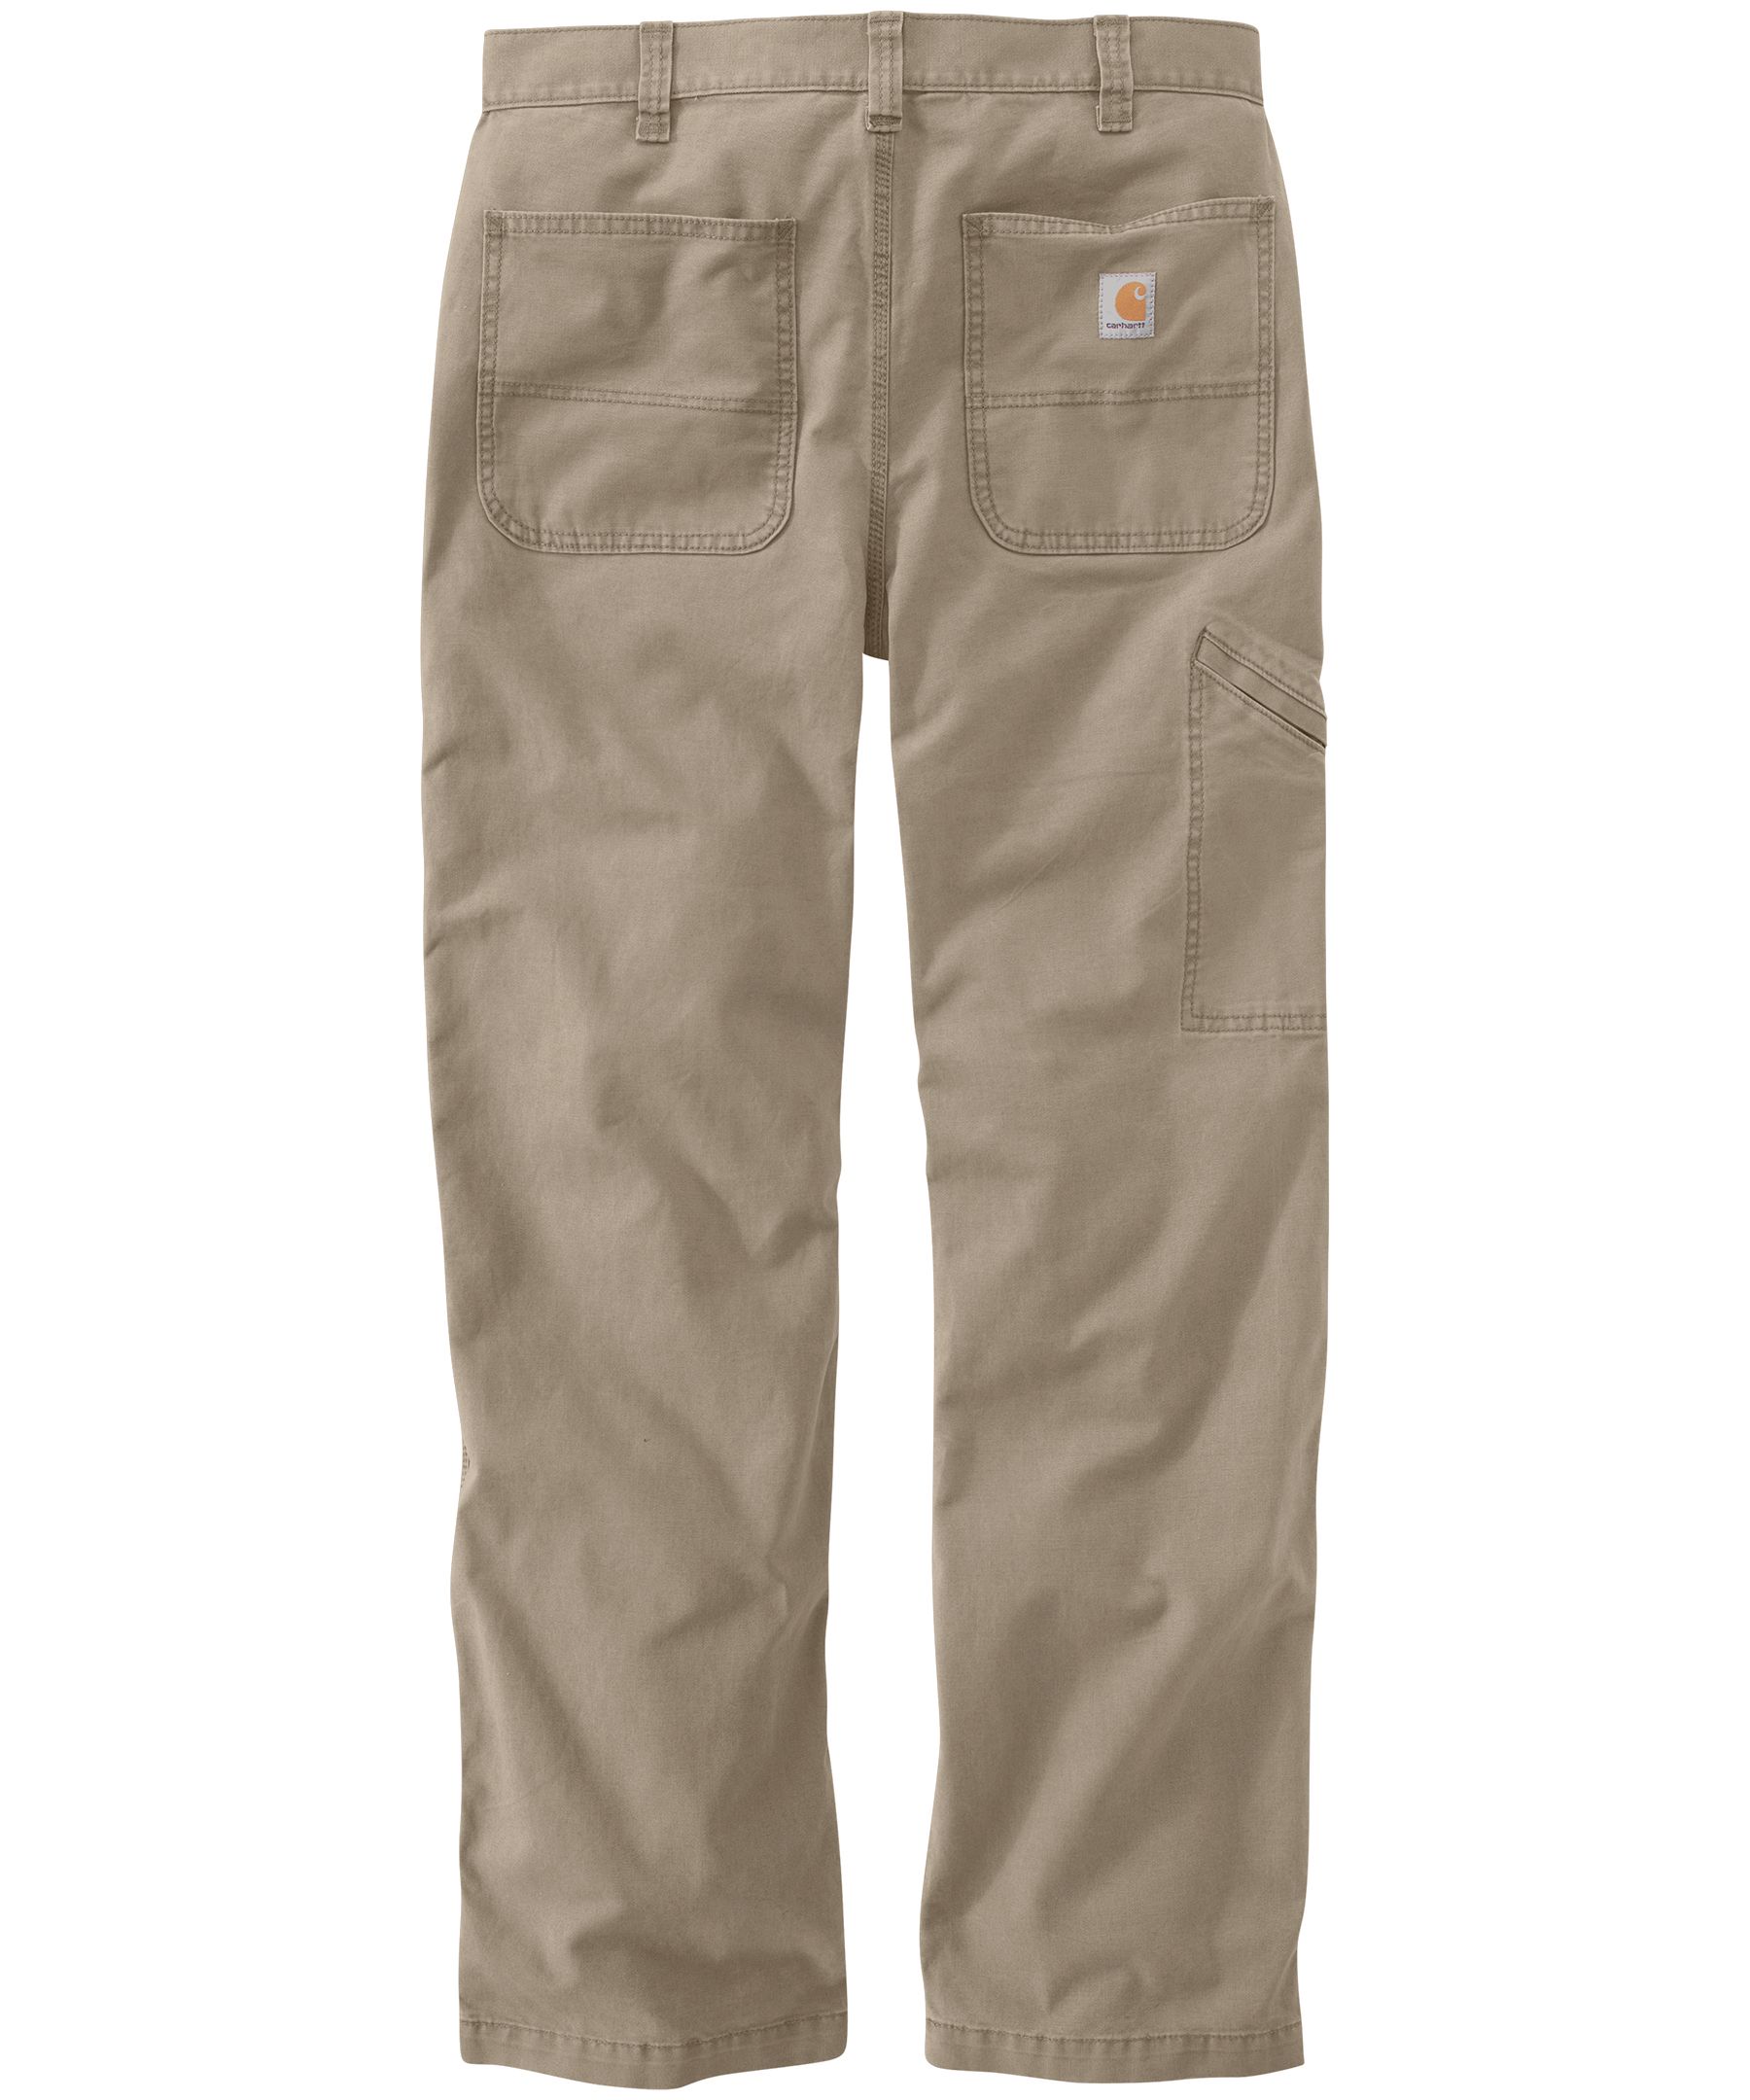 Carhartt Men's Rugged Flex Rigby Relaxed Fit Dungaree Work Pants 